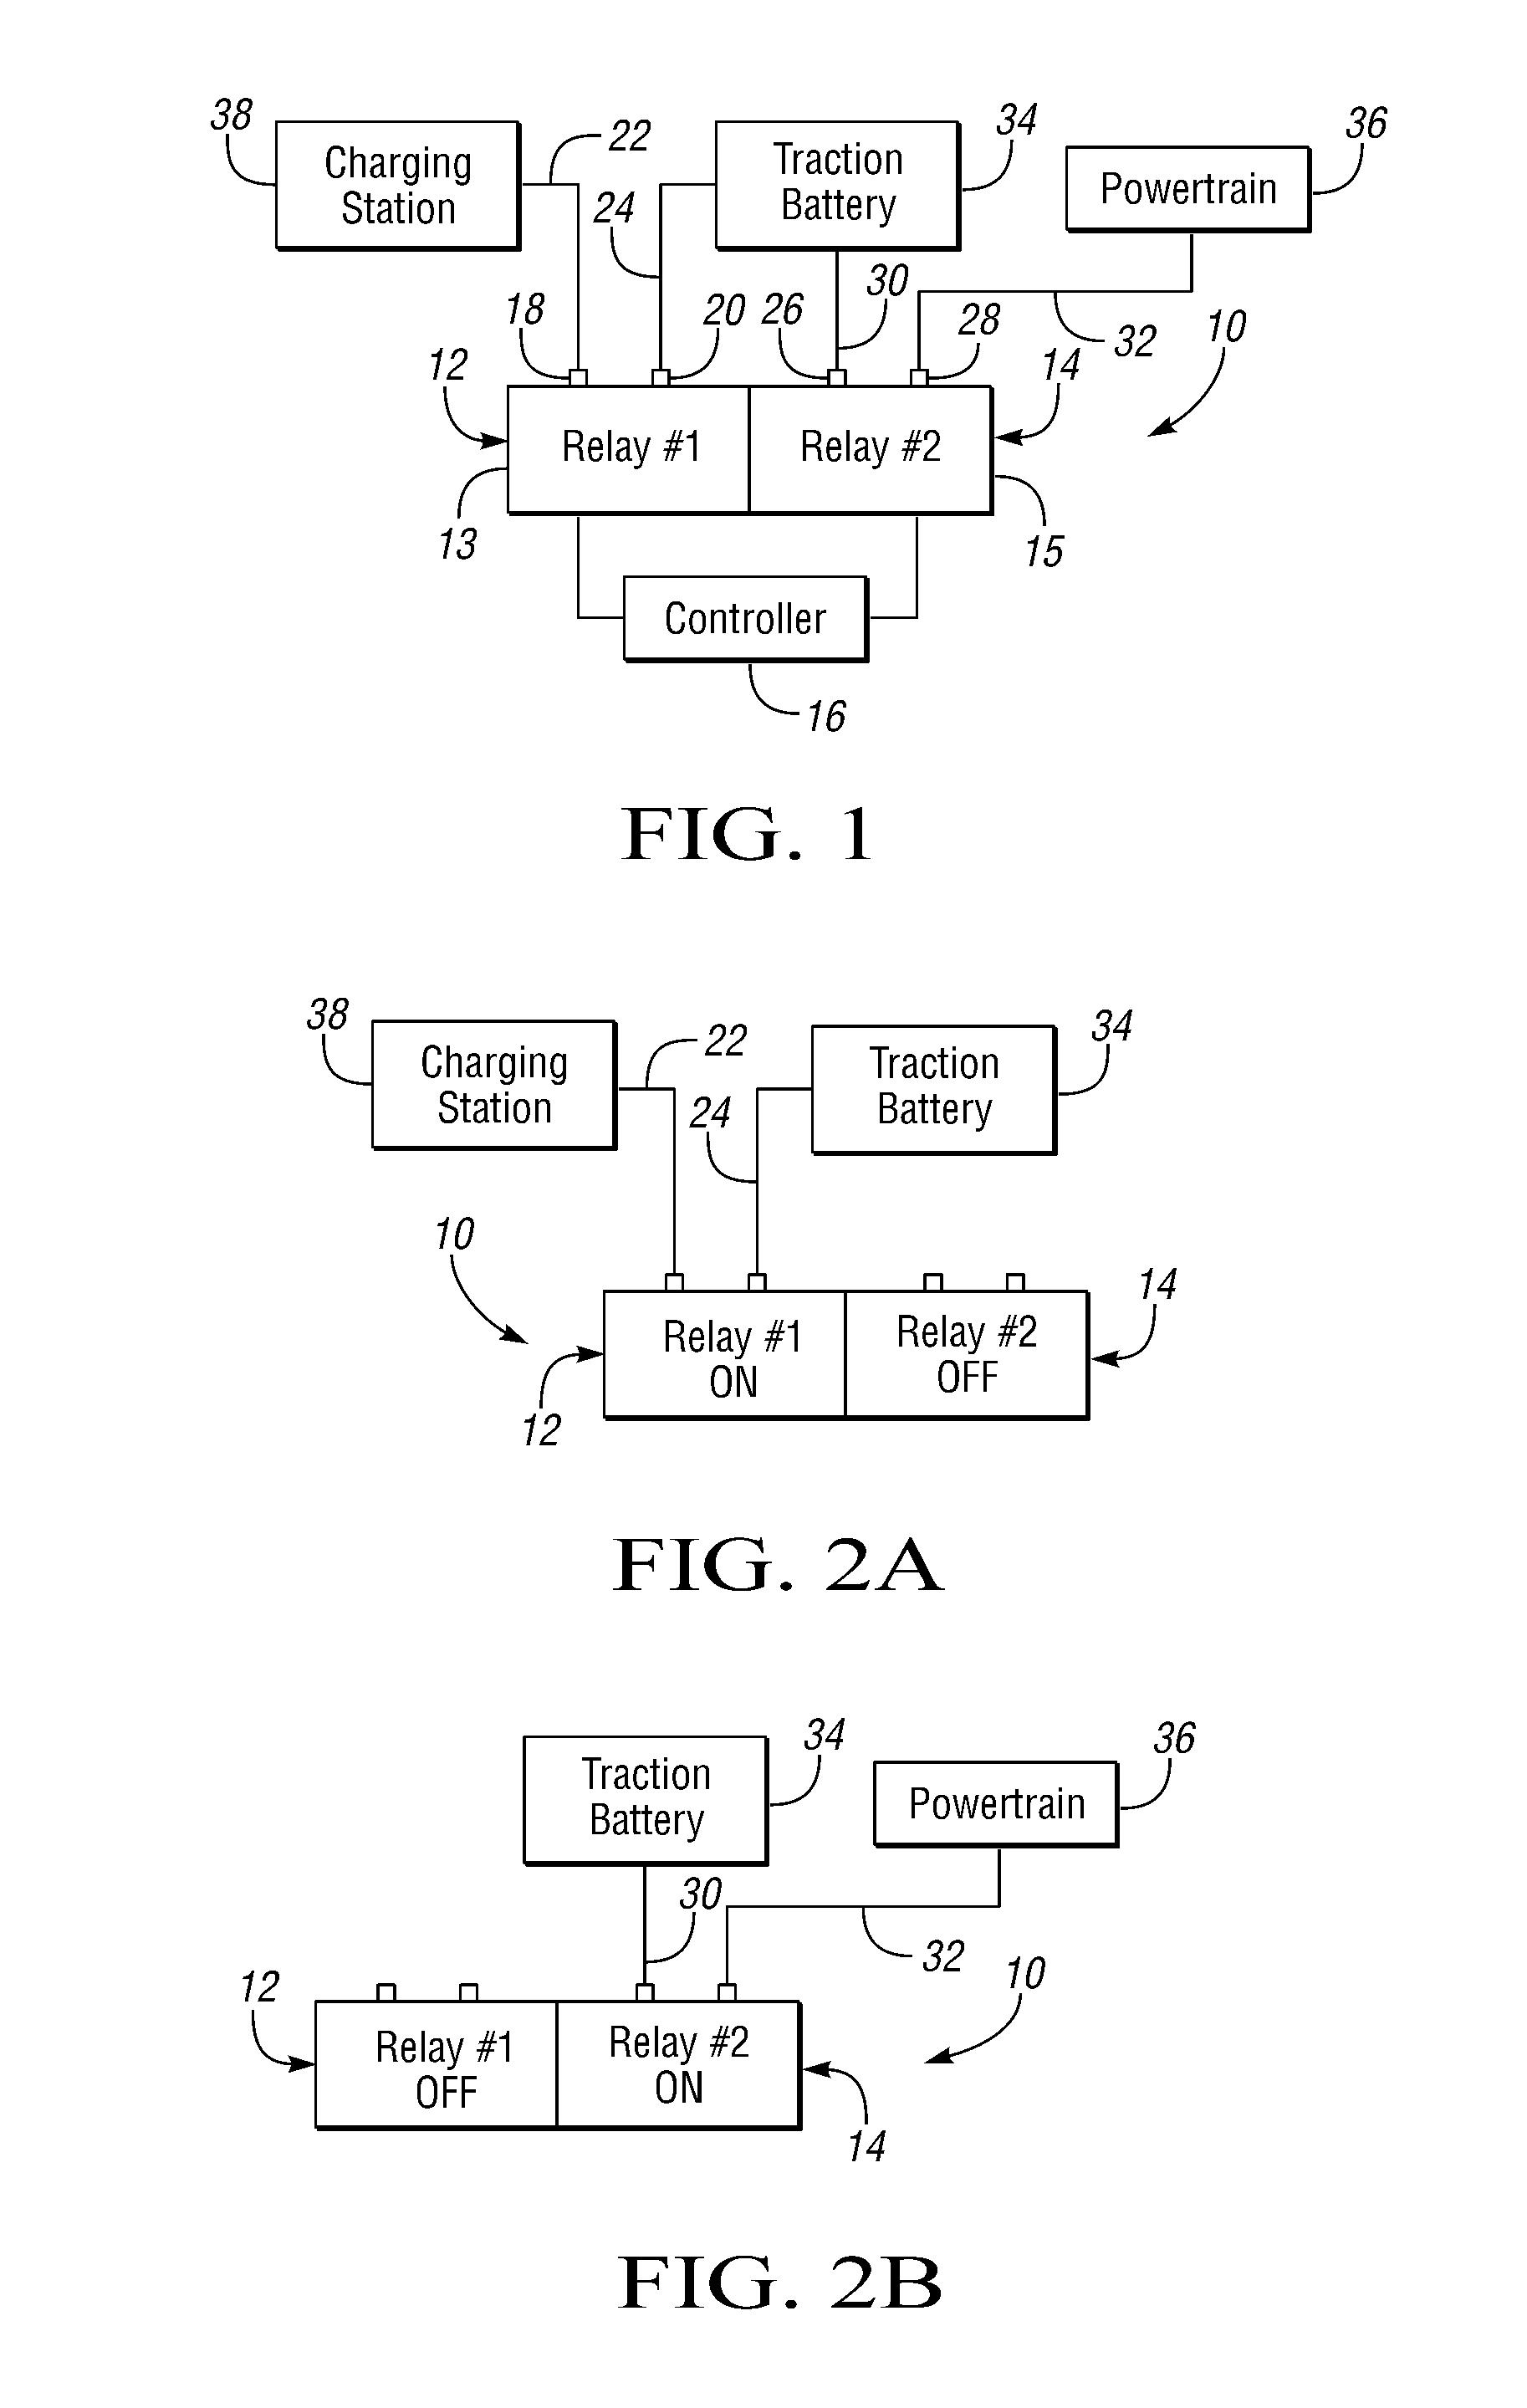 Relay system having dual relays configured as heat sinks for one another